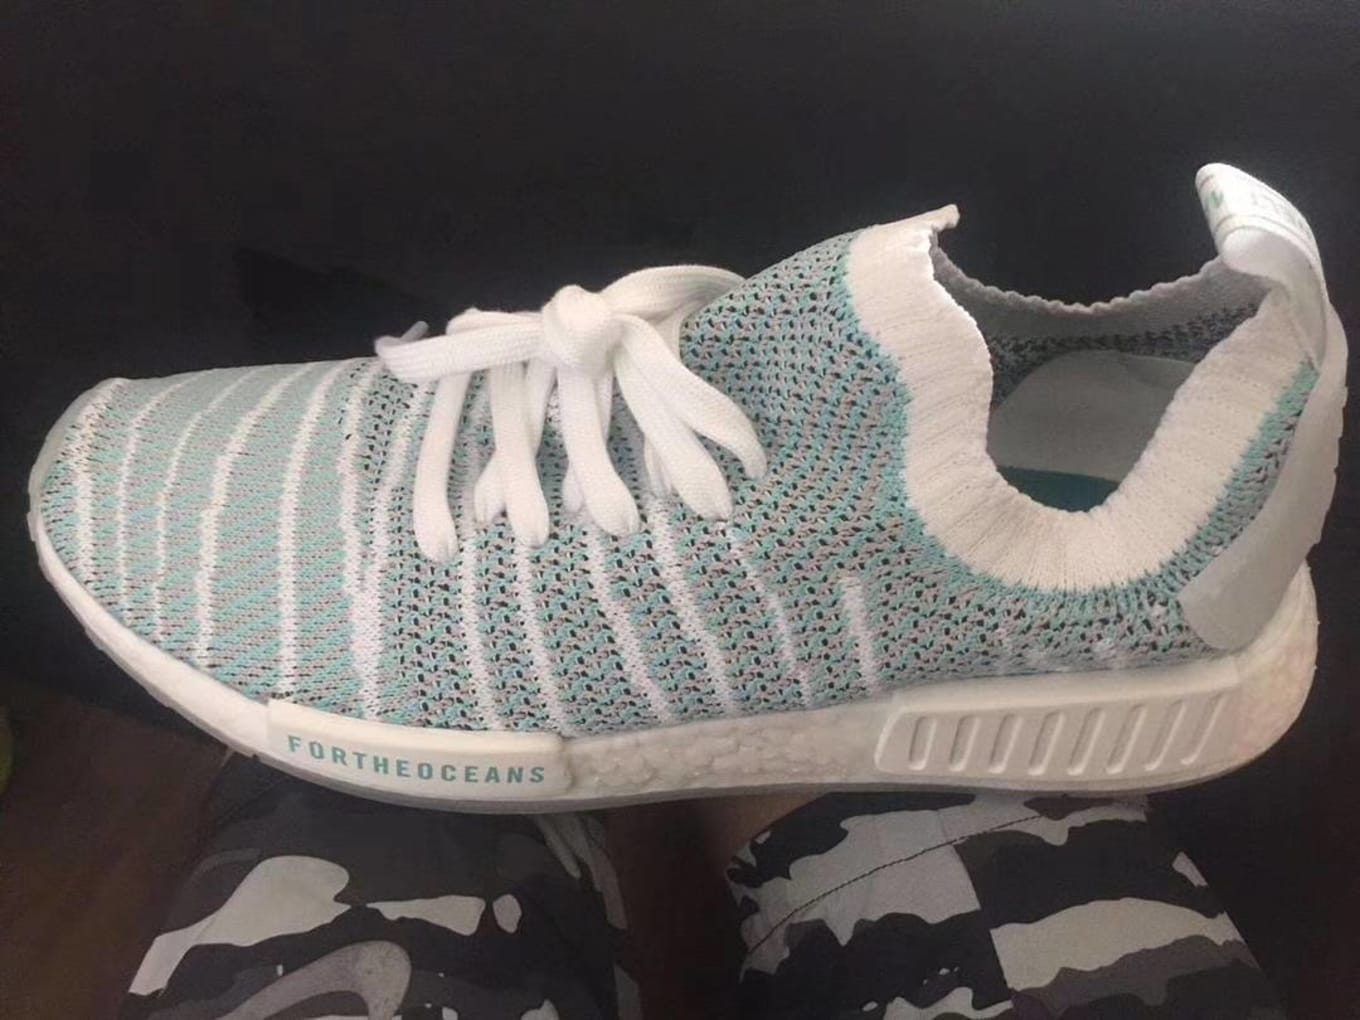 parley x nmd